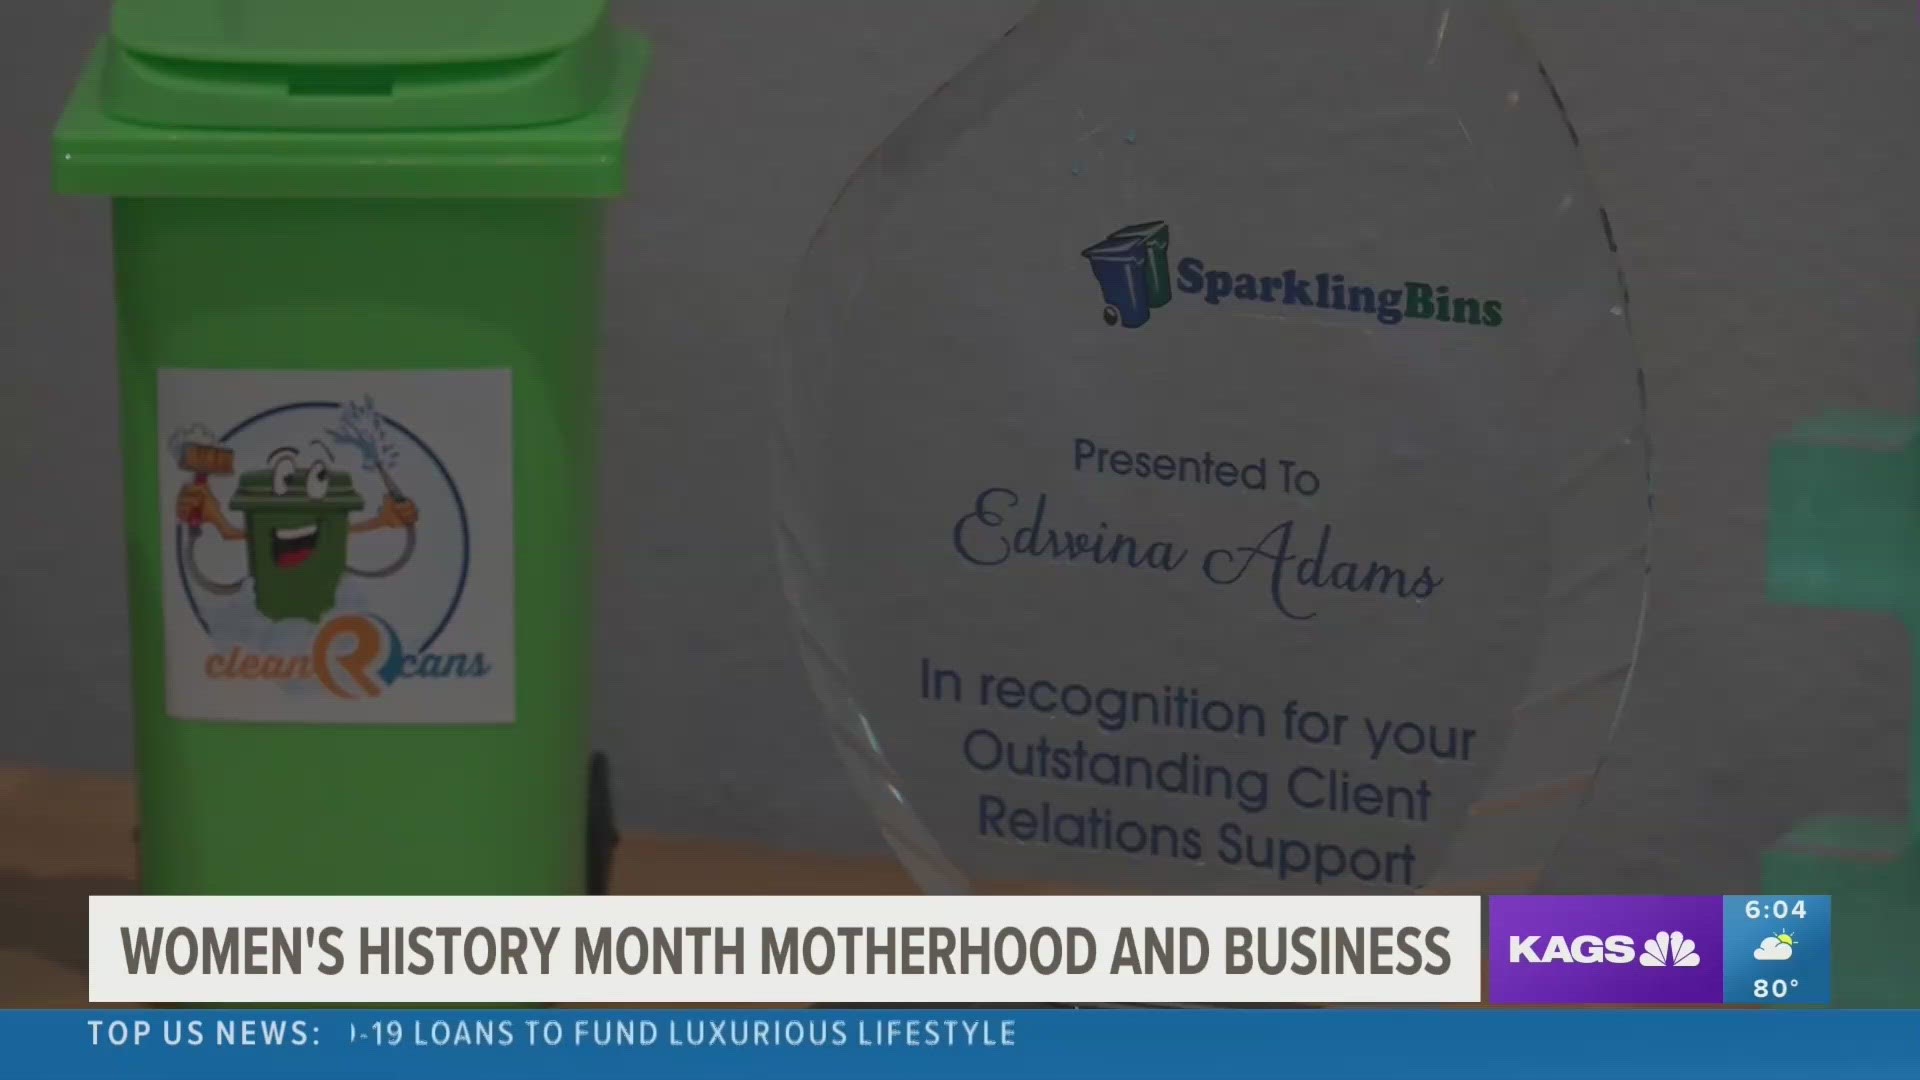 Balancing being a mom and a business owner isn't easy; one local business owner and mom reflects on her struggles juggling her profession and motherly duties.